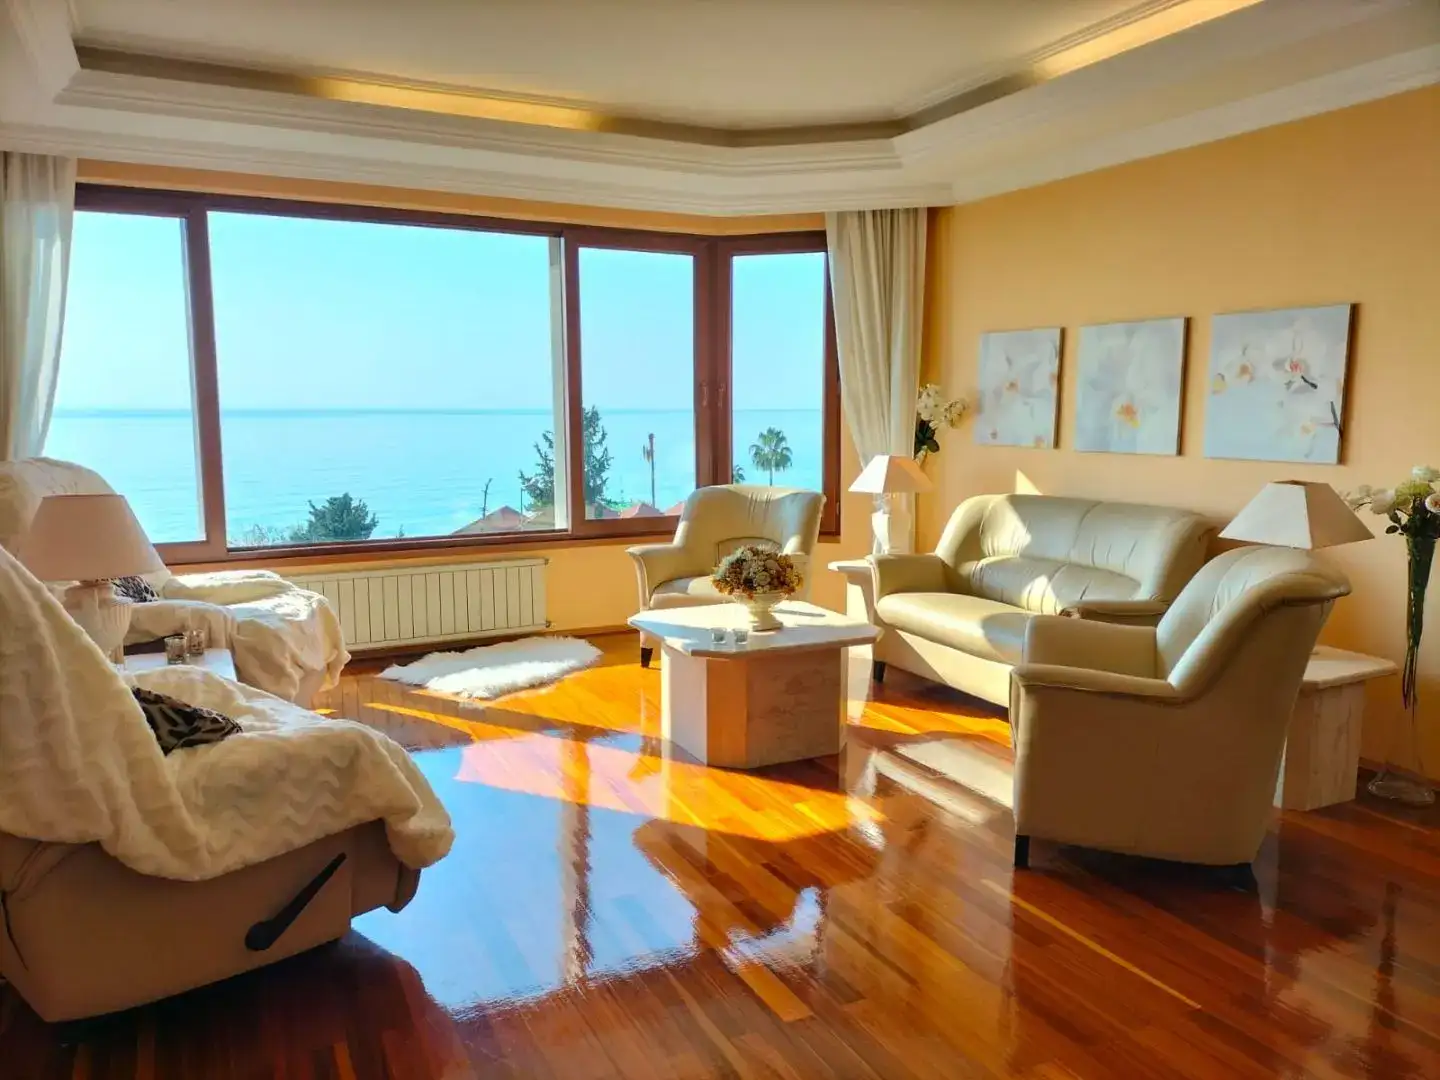 FRONT BEACH LİN APARTMENT FOR SALE İN ALANYA